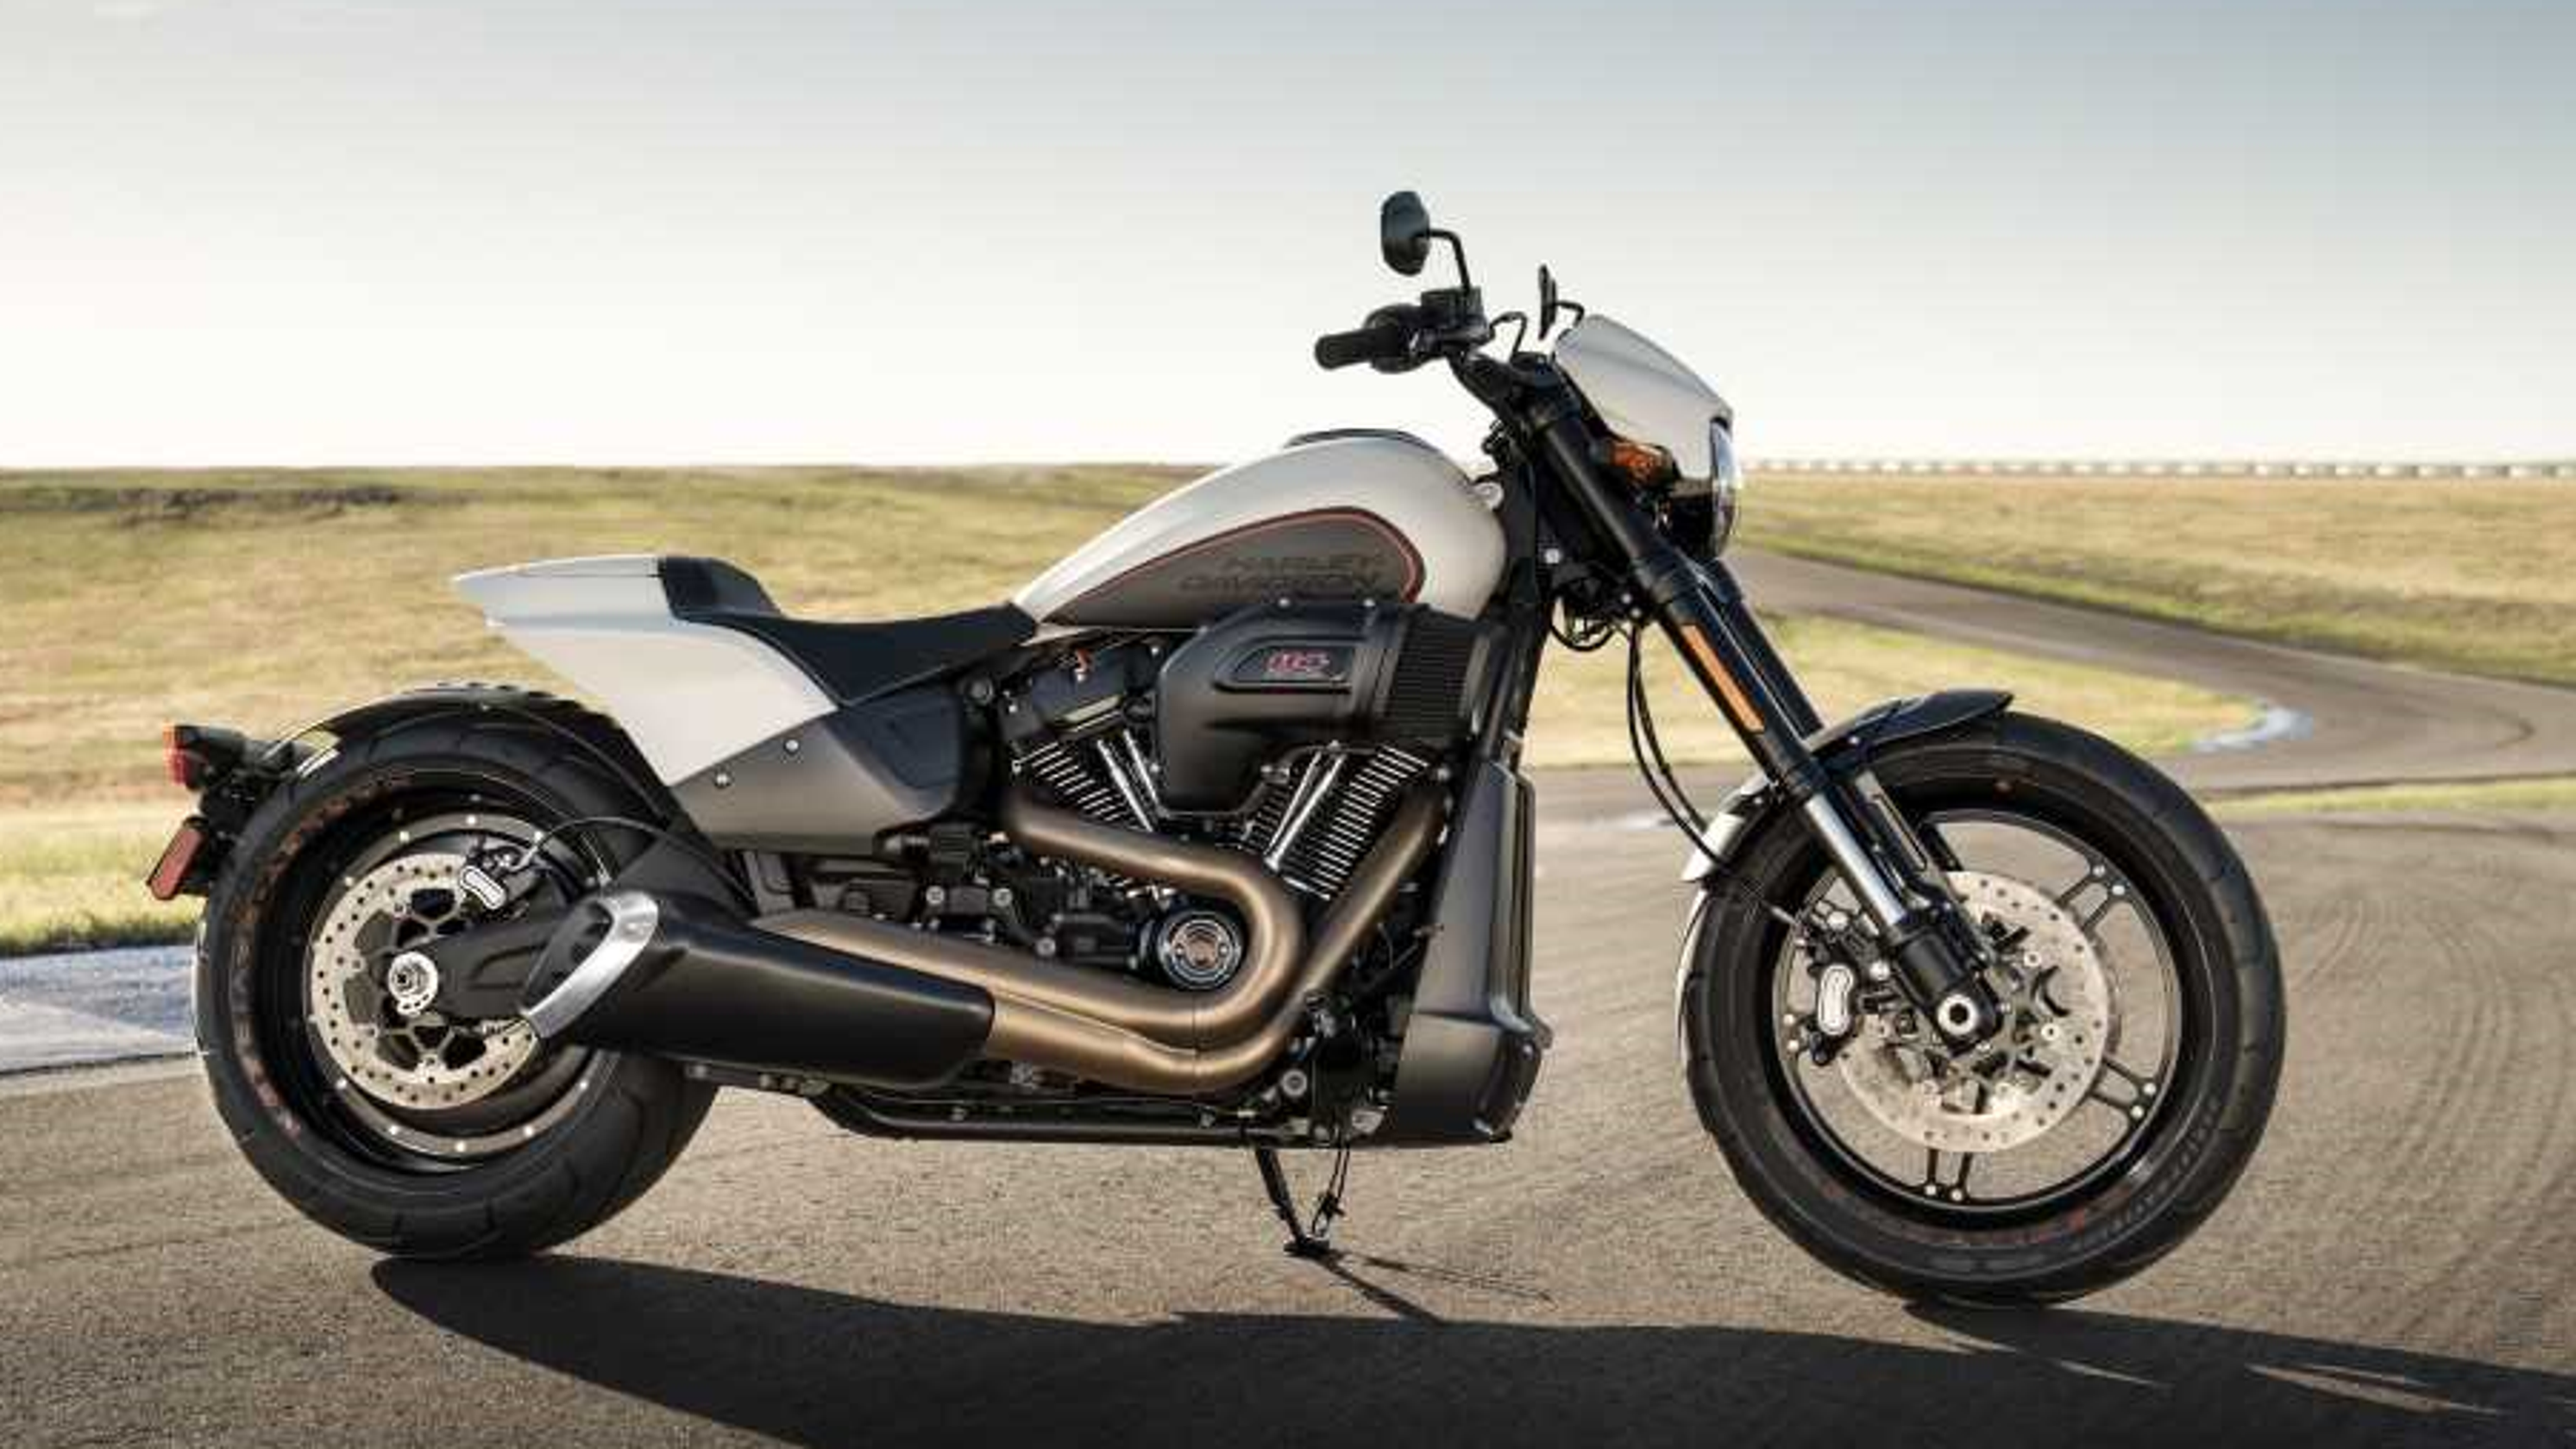 Harley-Davidson launches new cruiser, CVO motorcycles for 2019